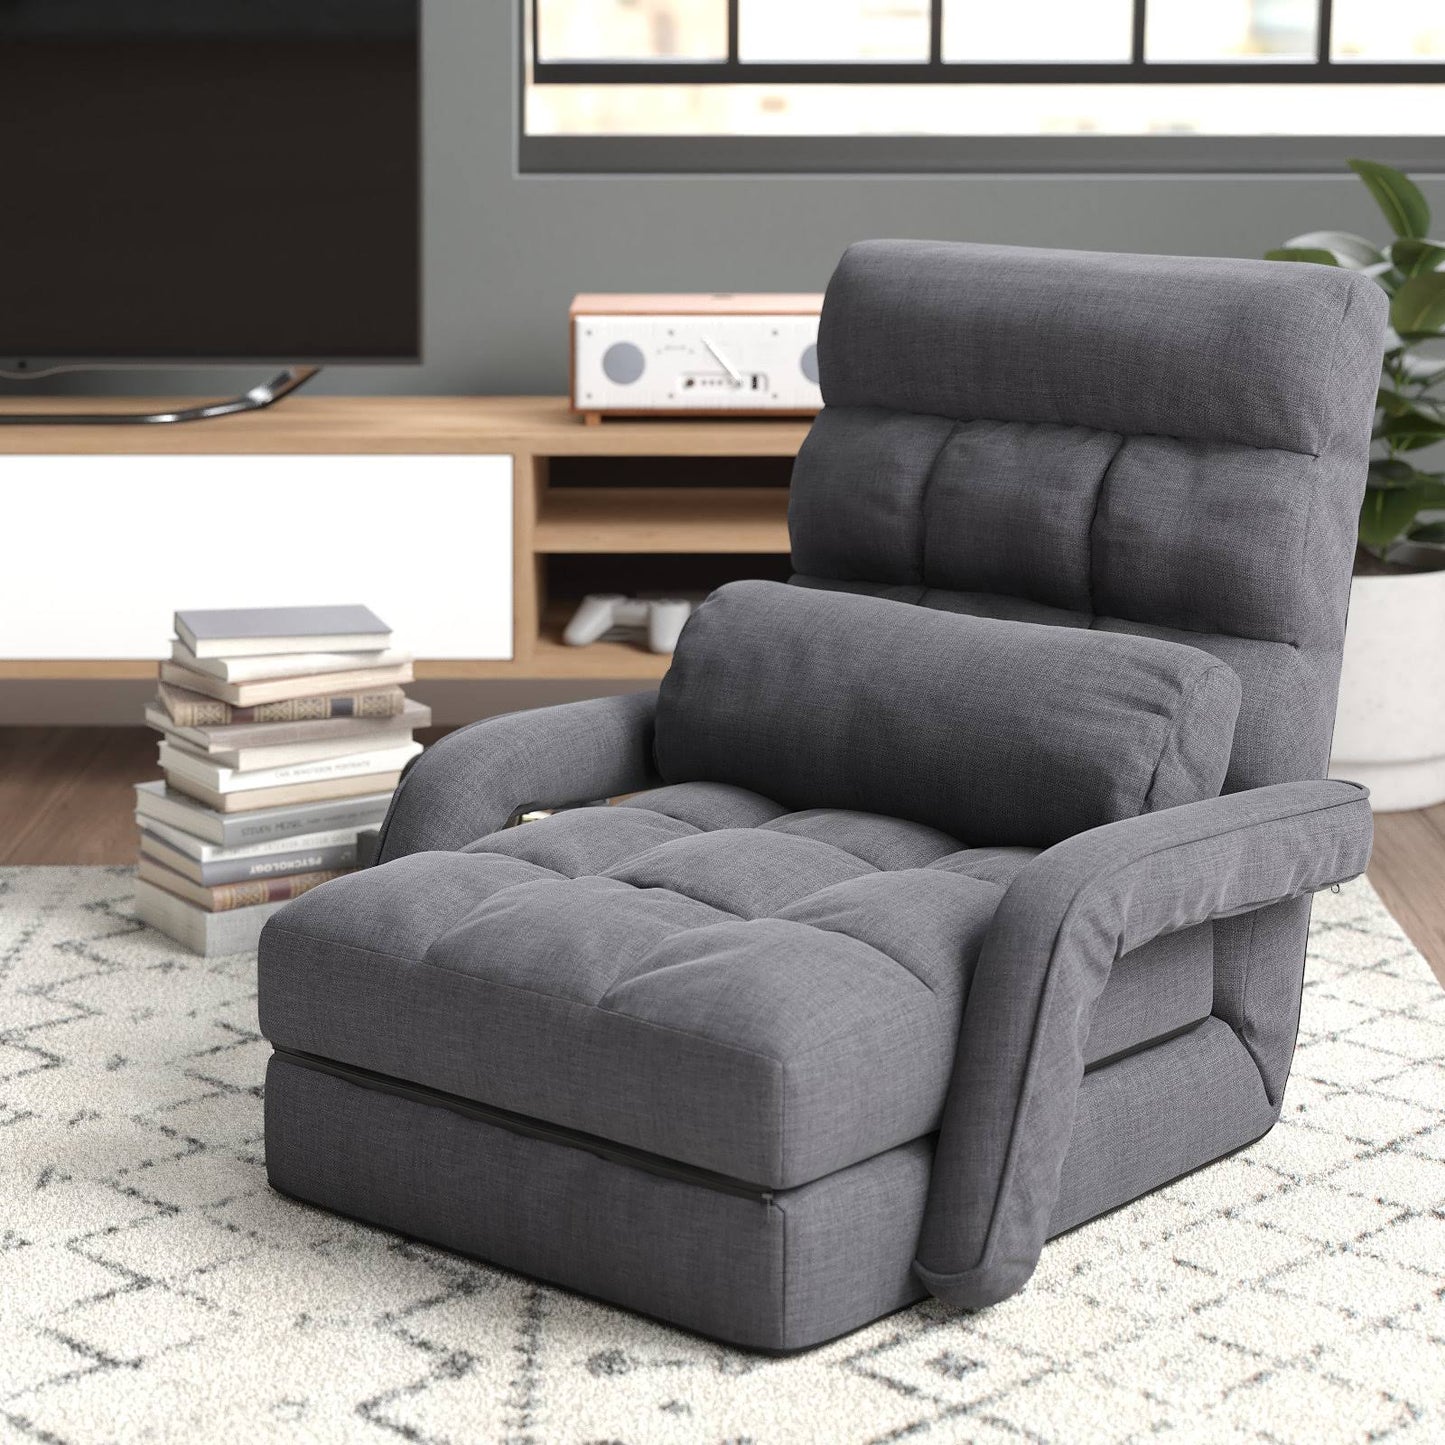 Folding Lazy Sofa Floor Chair Sofa Lounger Bed With Armrests And Pillow Viv + Rae